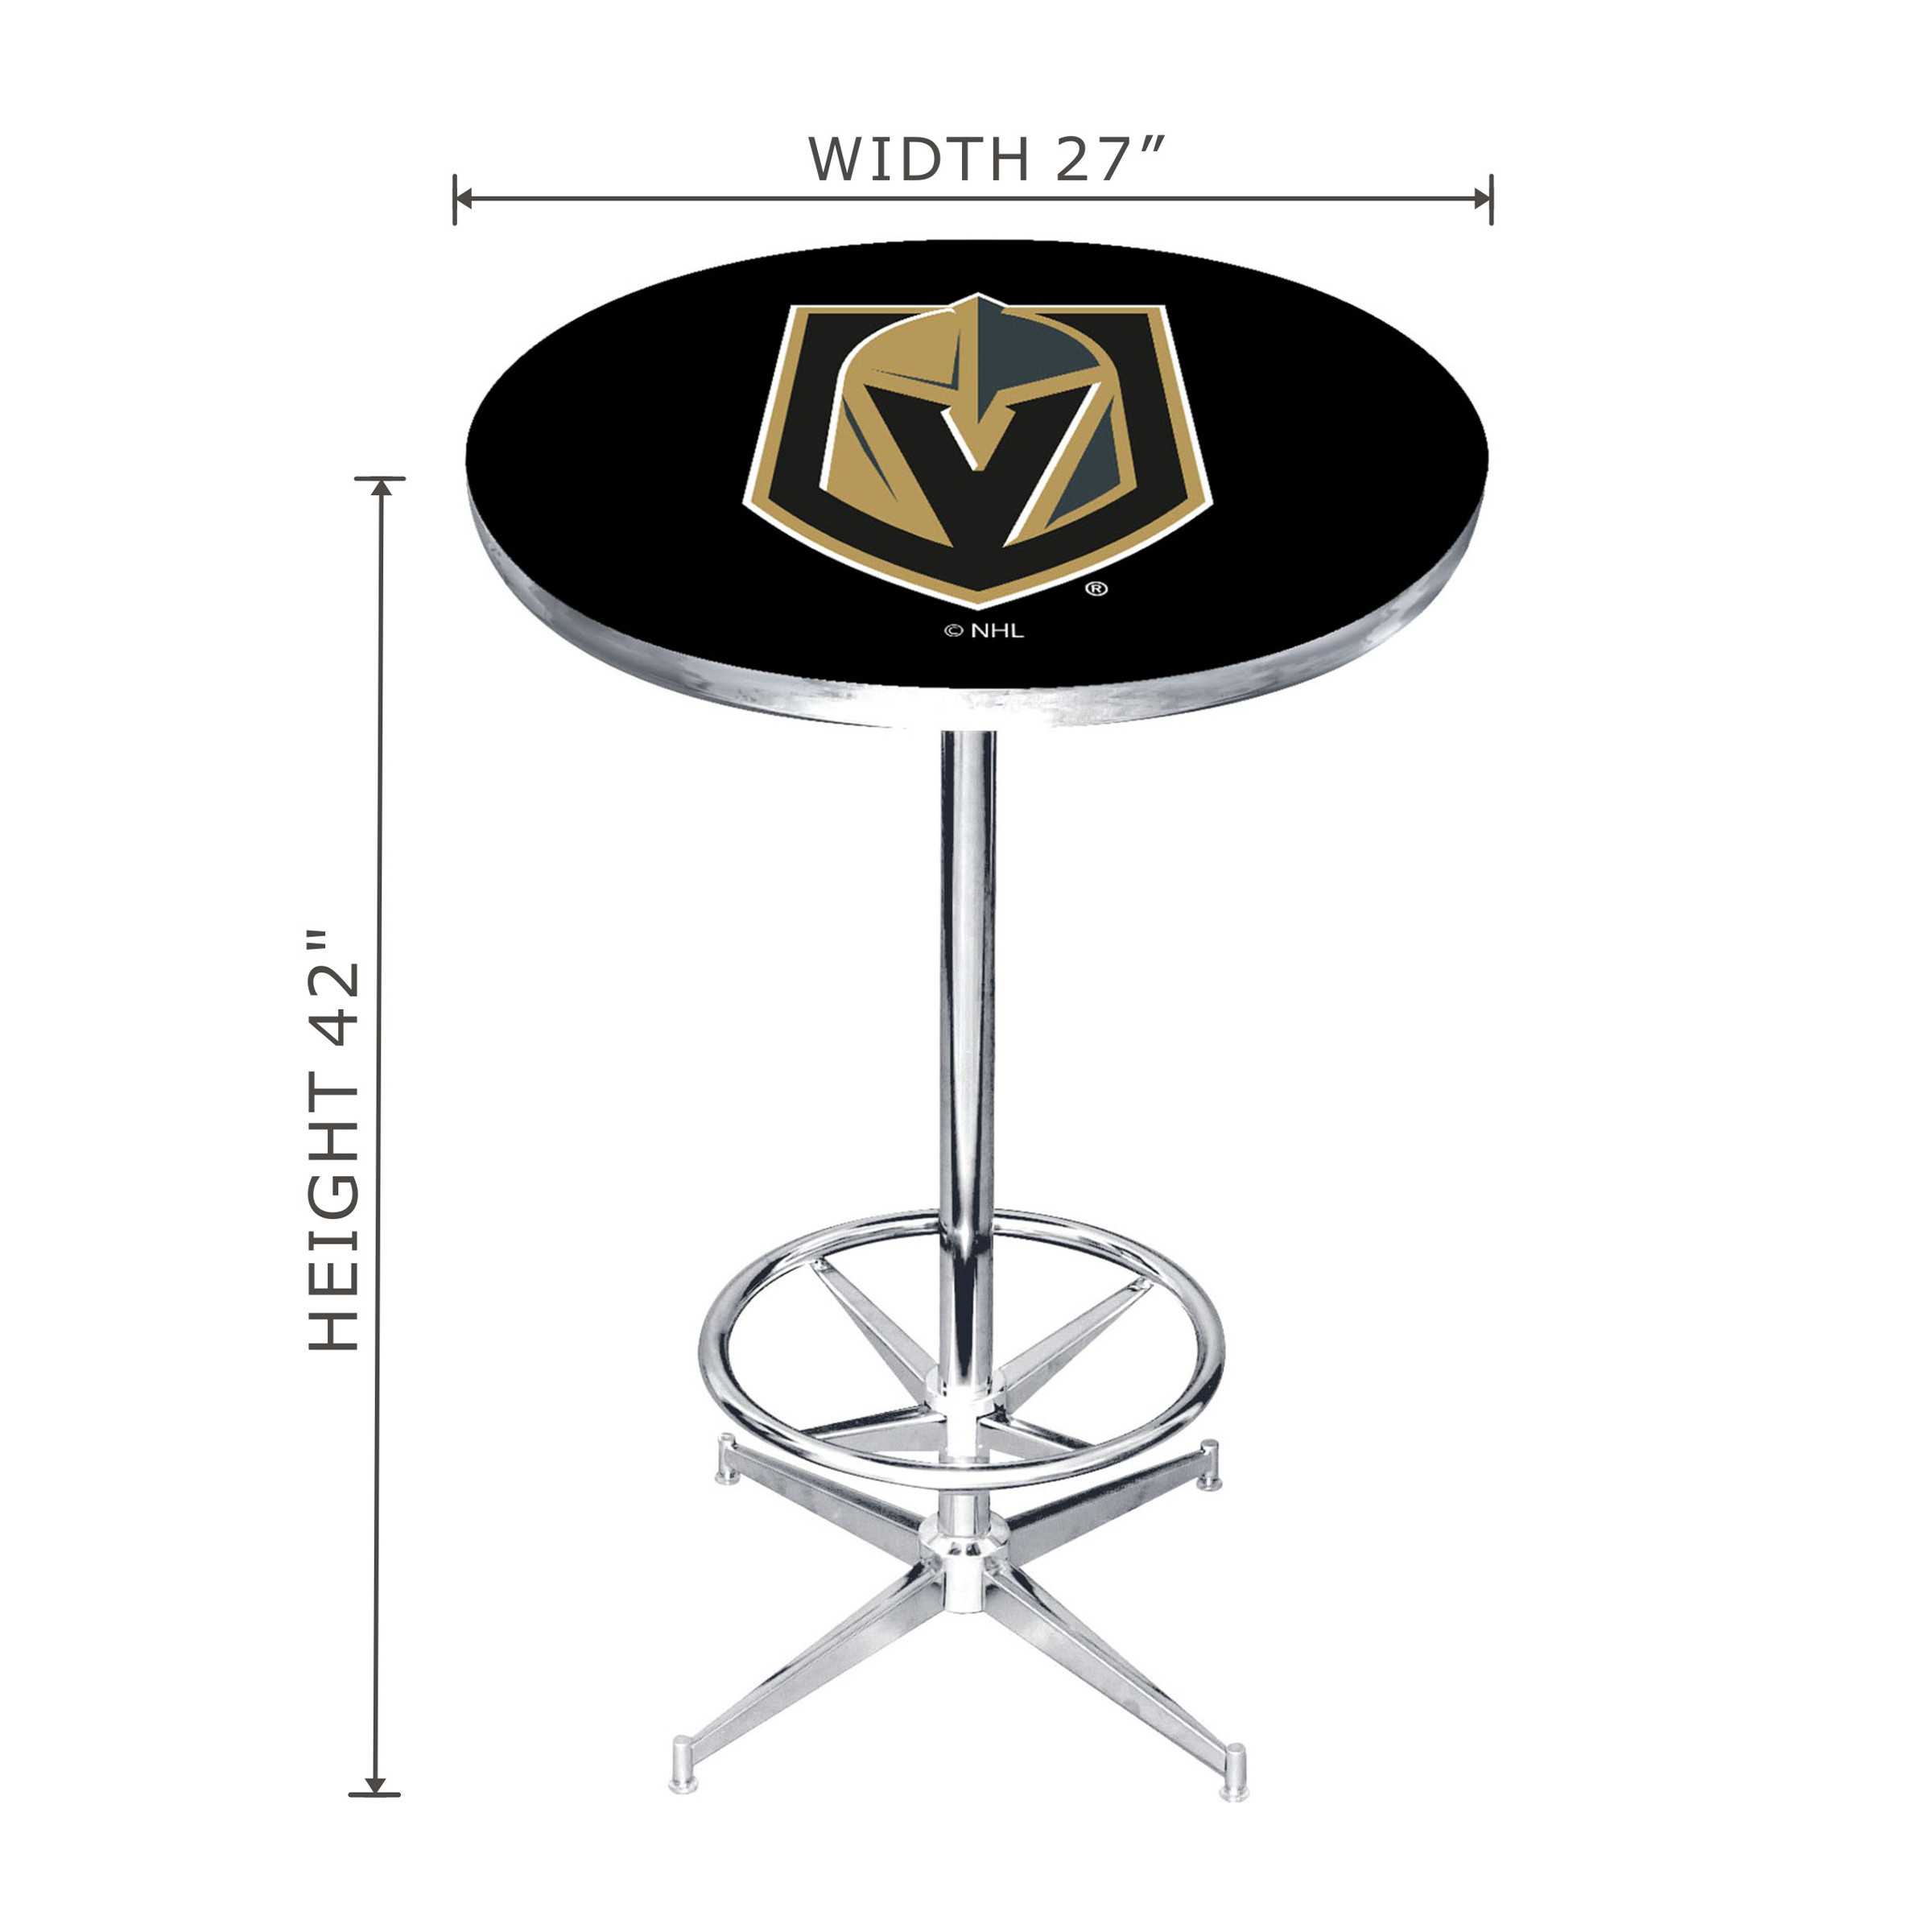 GOLDEN KNIGHTS PUB TABLE